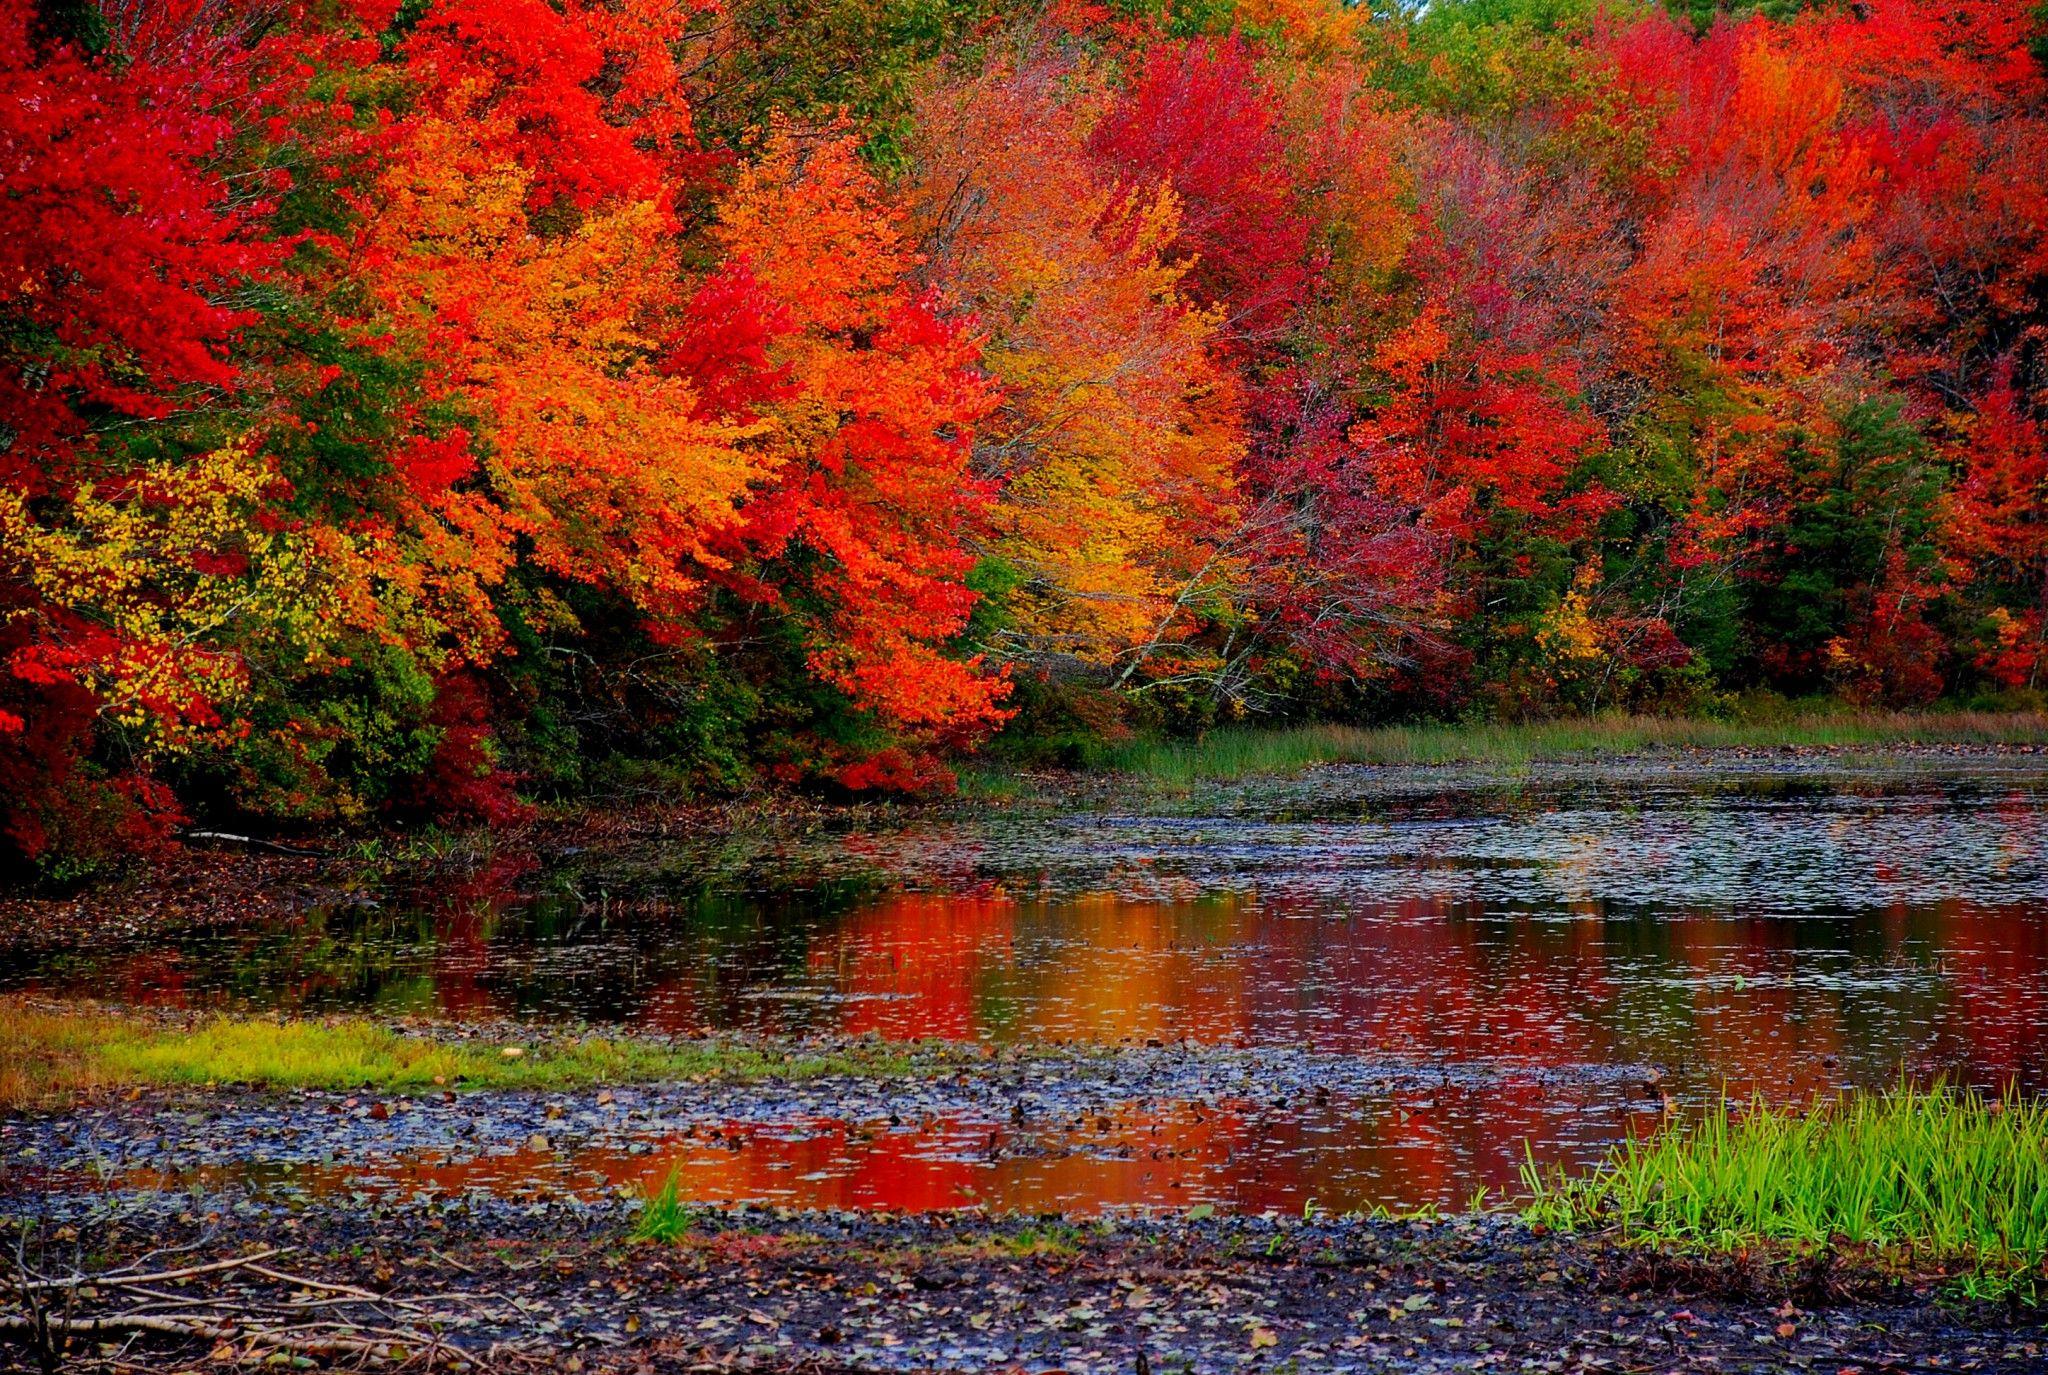 Vermont Fall Foliage Wallpapers - Top Free Vermont Fall Foliage ...